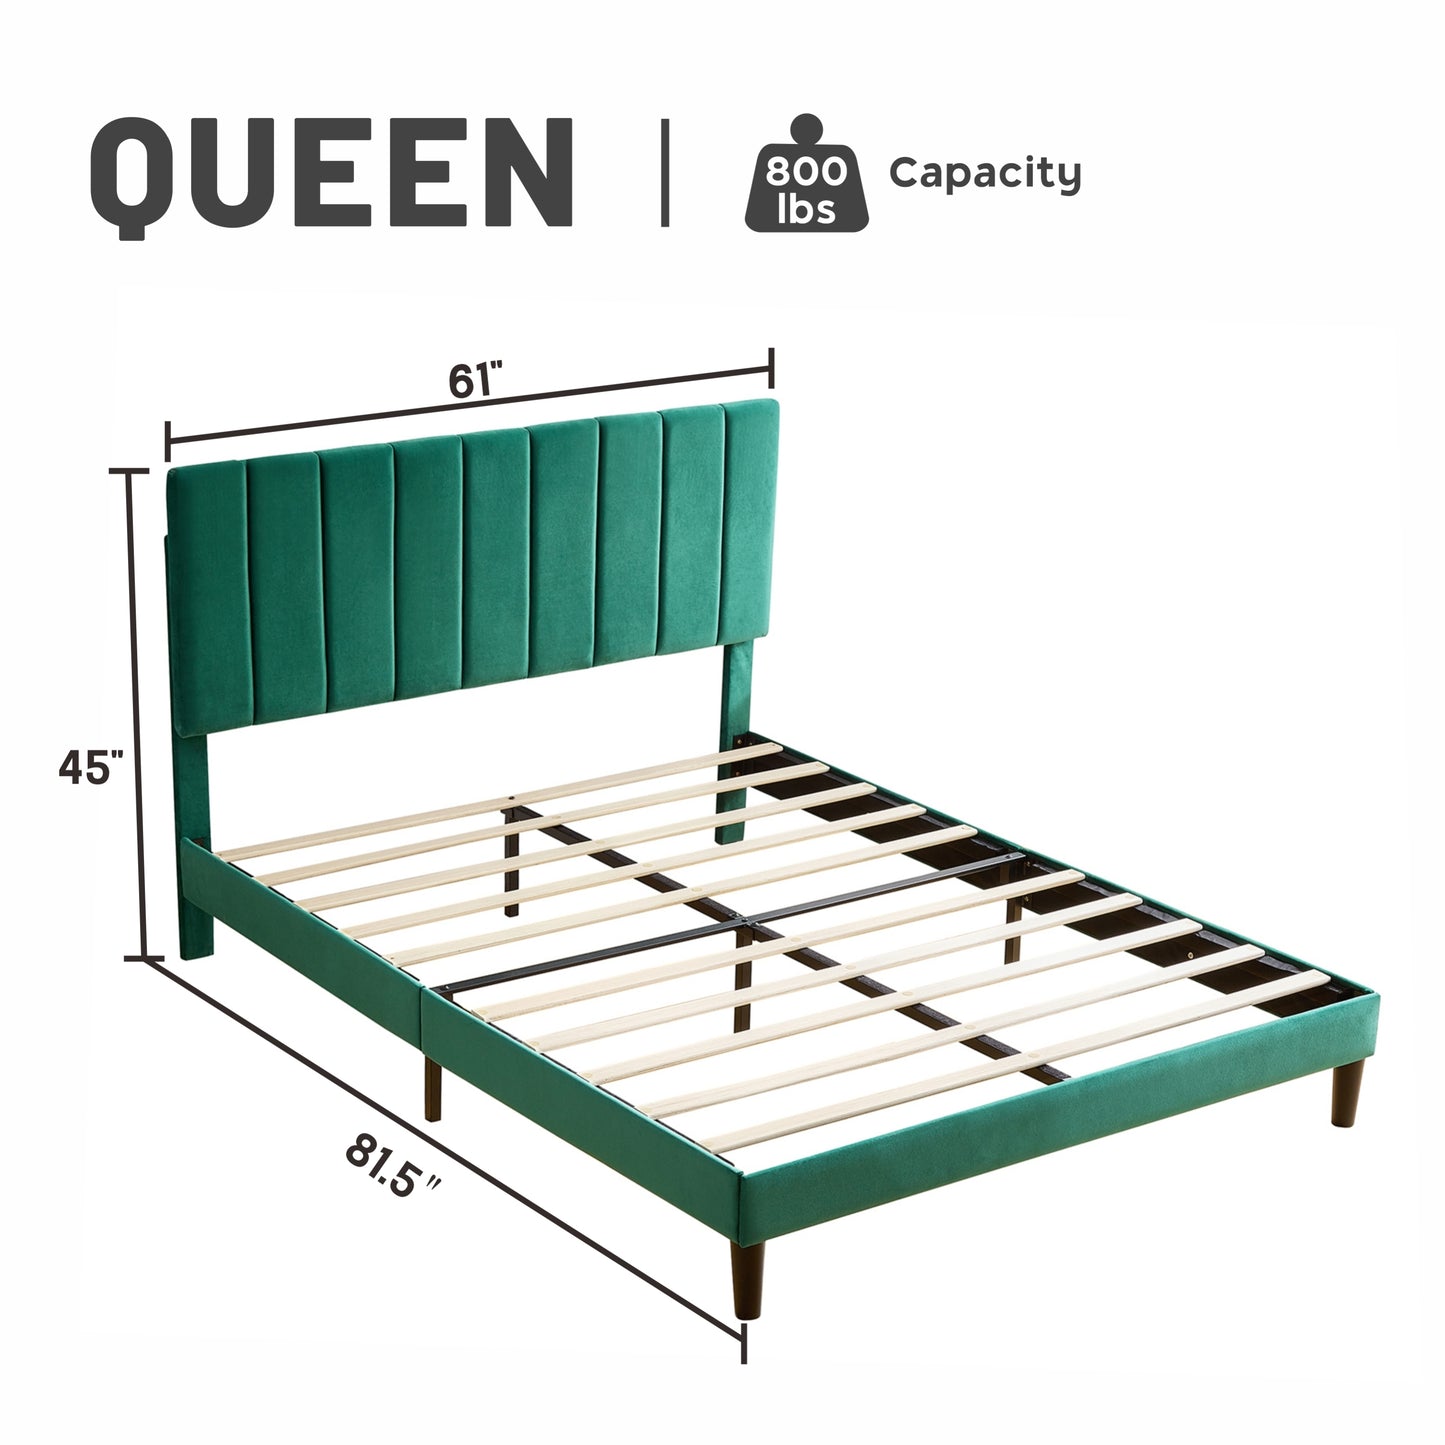 Queen Size Platform Bed with Upholstered Headboard and Slat Support, Heavy Duty Mattress Foundation, No Box Spring Required, Easy to Assemble, Green